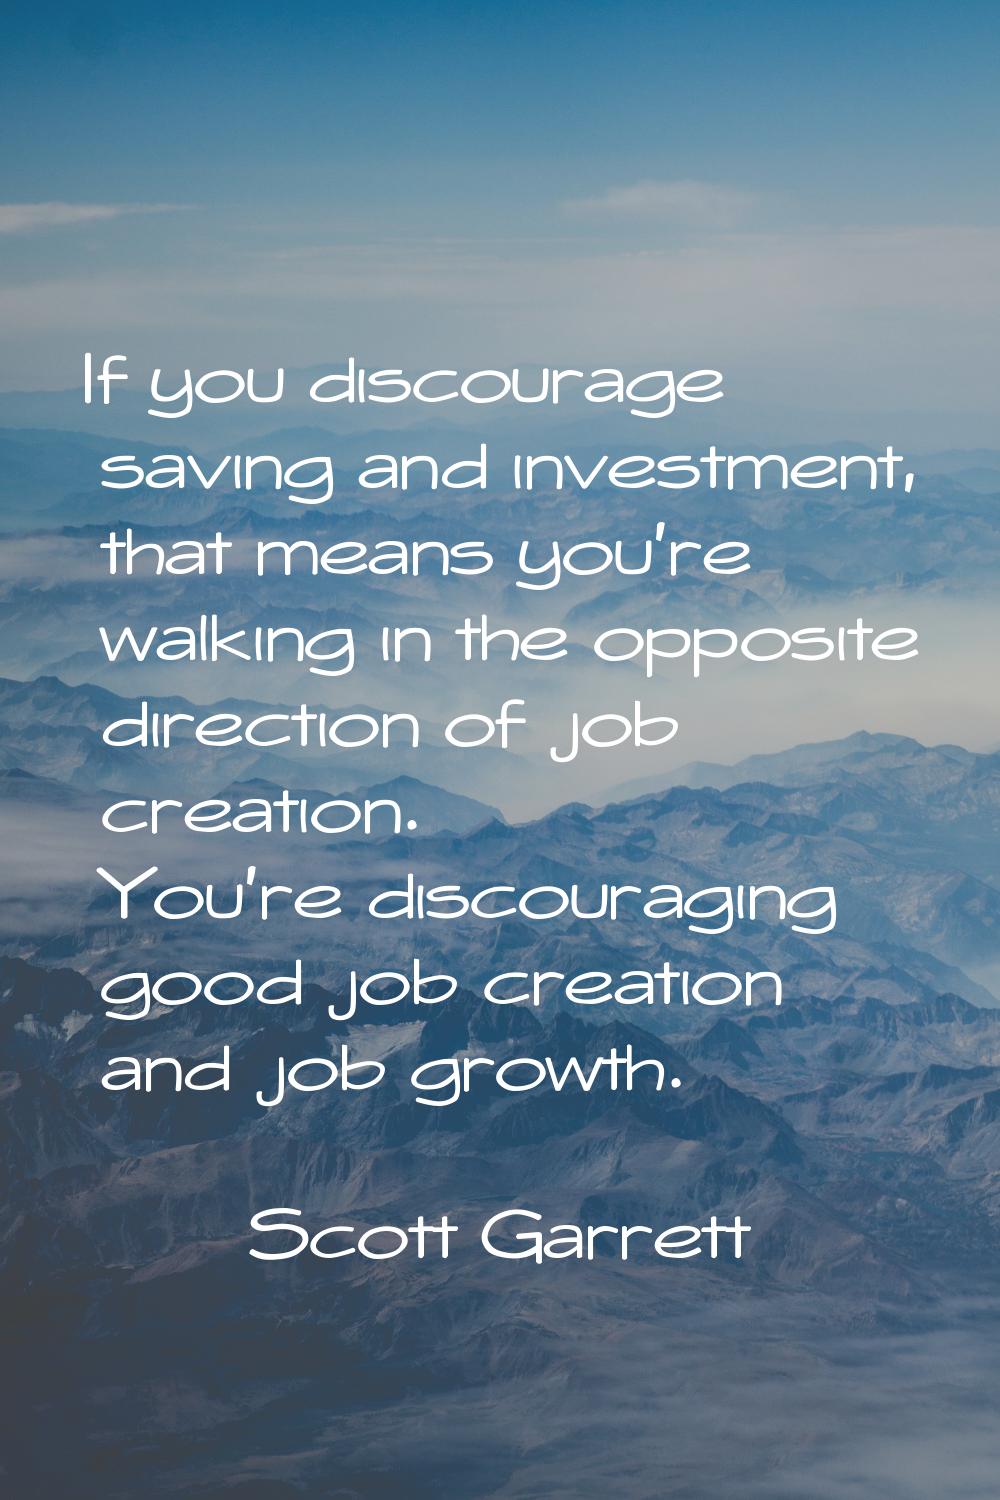 If you discourage saving and investment, that means you're walking in the opposite direction of job